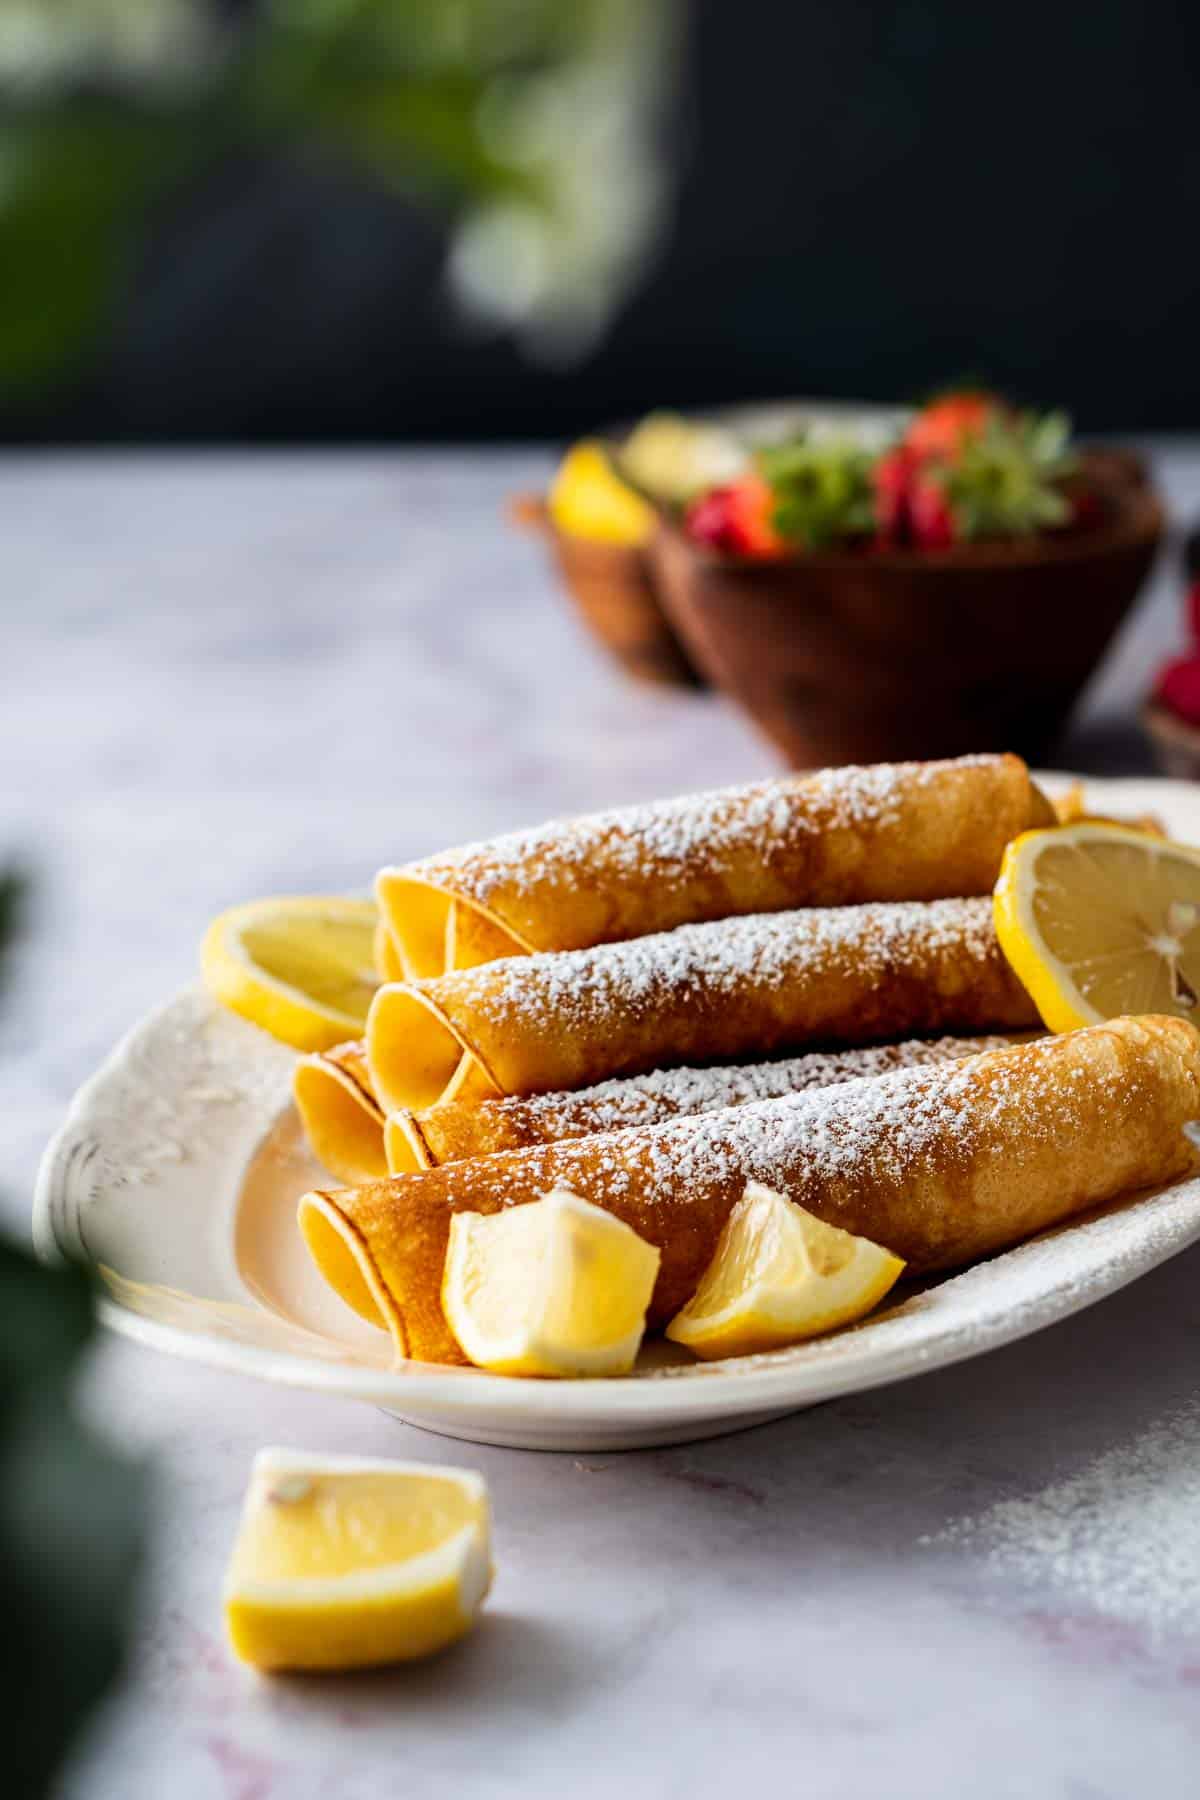 A plate of rolled pancakes served with sugar and lemons.